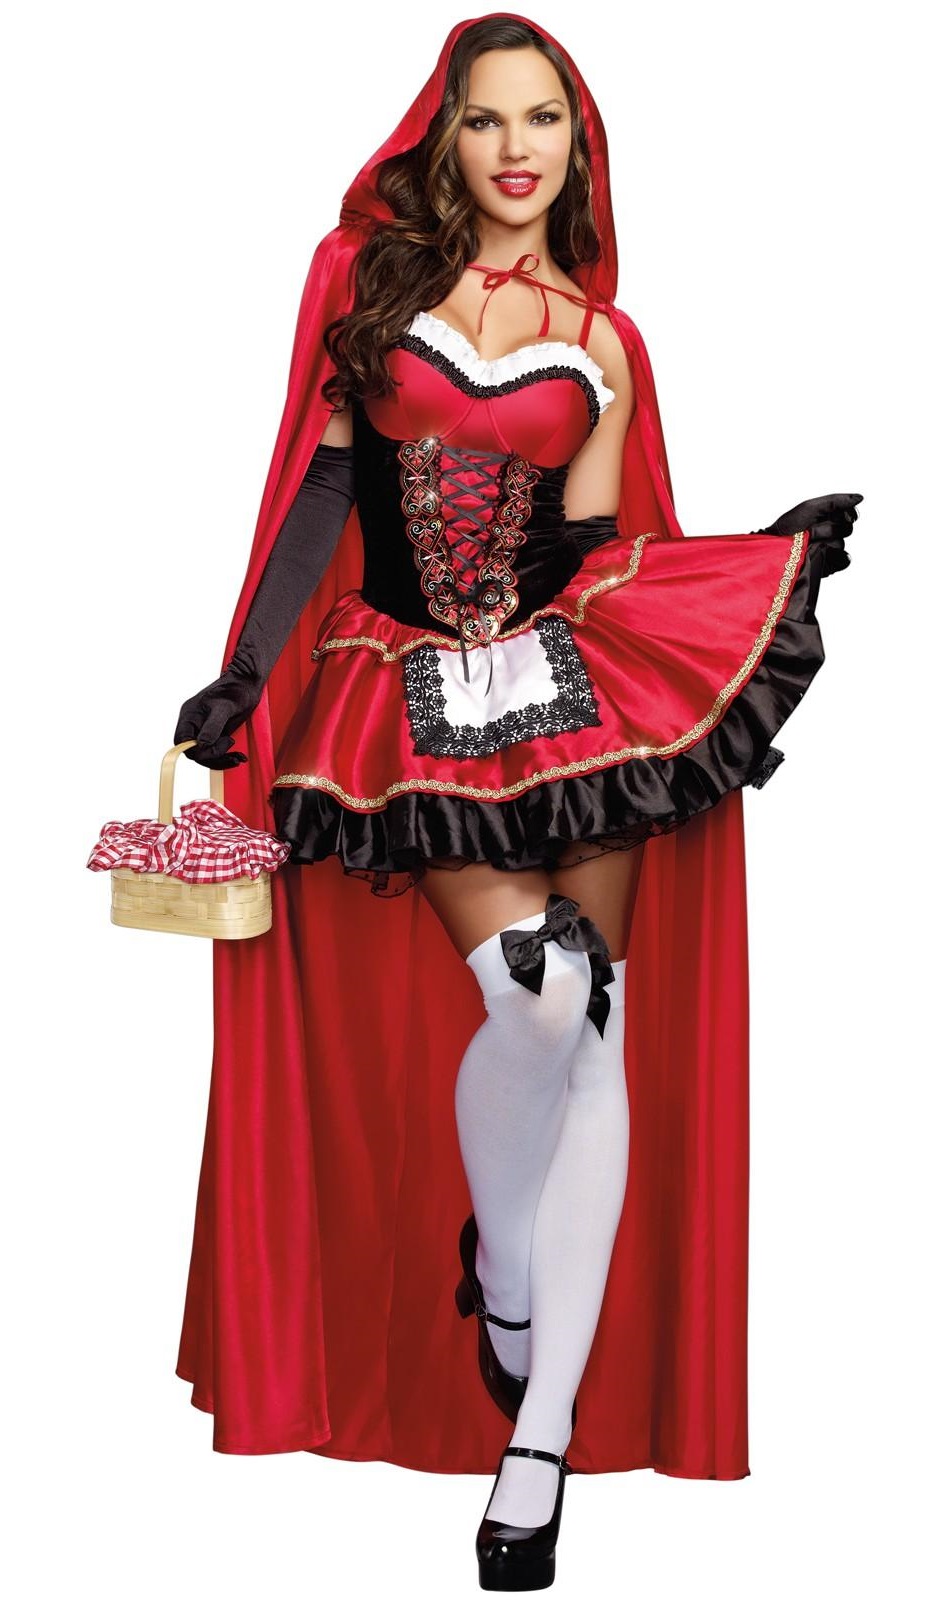 Tech Media Tainment Sexy Little Red Riding Hood A